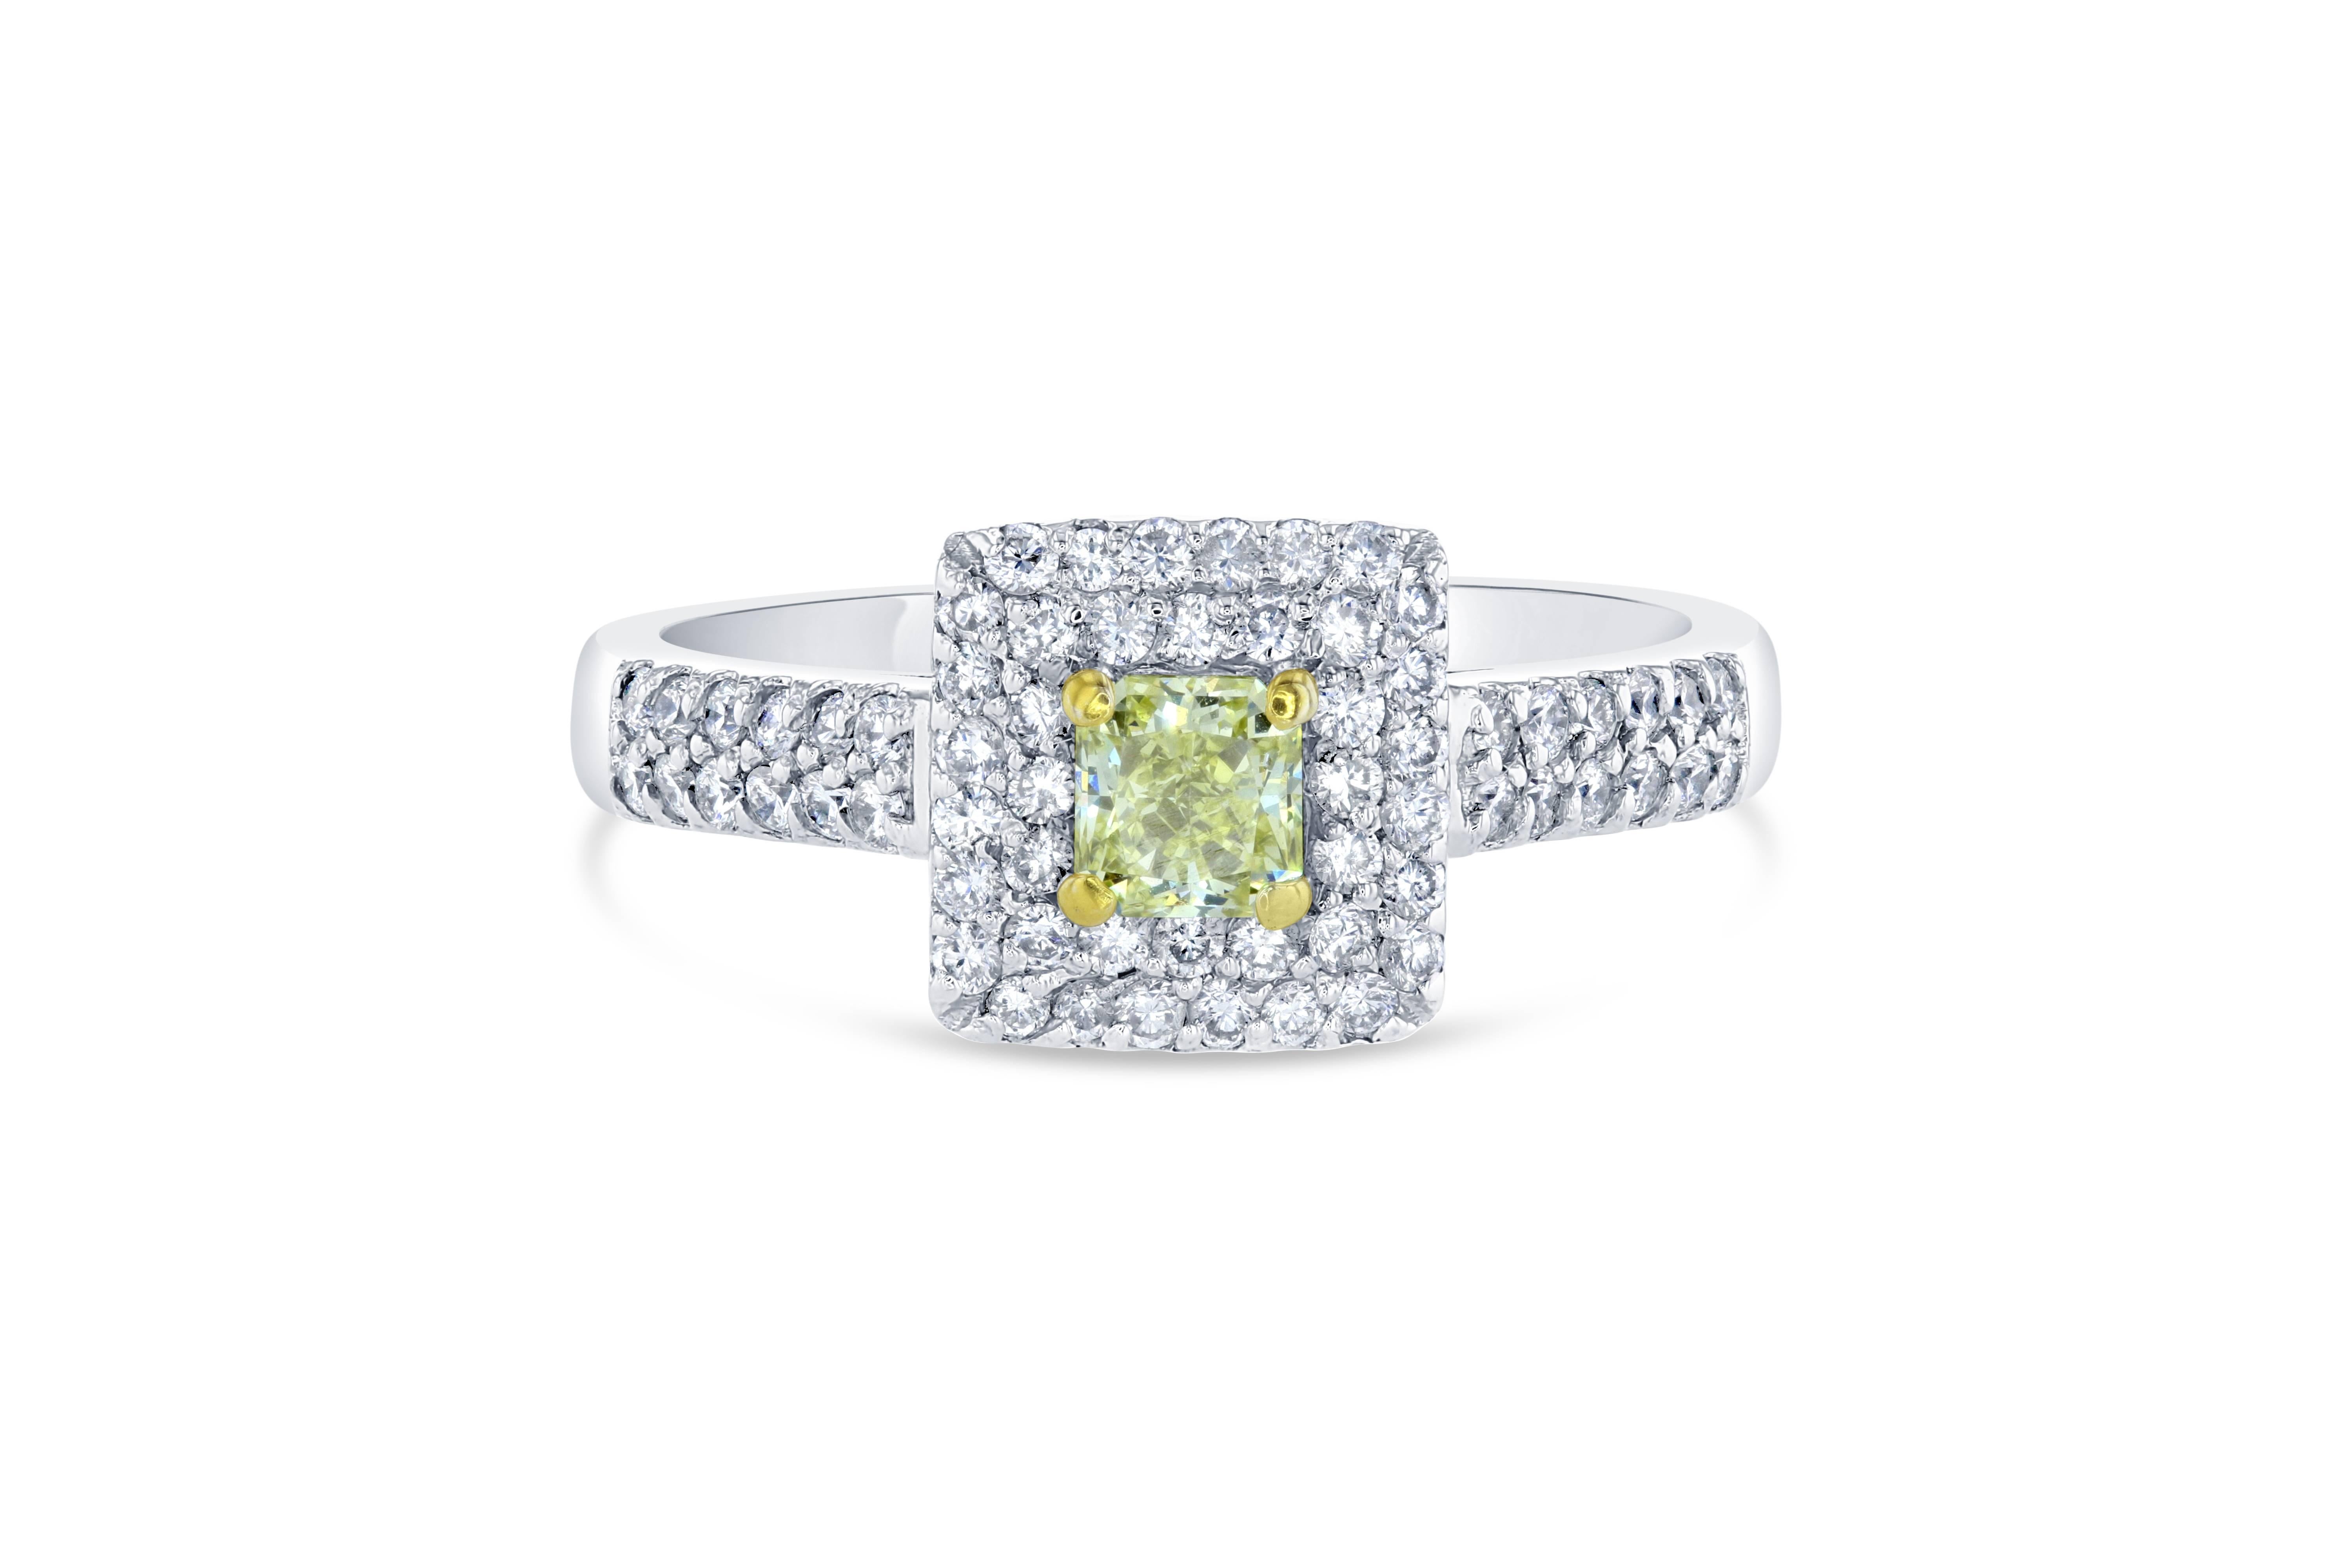 A gorgeous engagement ring that will leave her breathless! 

The center Yellow diamond is a Princess cut weighing 0.38 carat.  This is a Natural Intense Yellow Diamond with a Clarity of VS2.  It is surrounded by 64 Round cut diamonds weighing 0.50